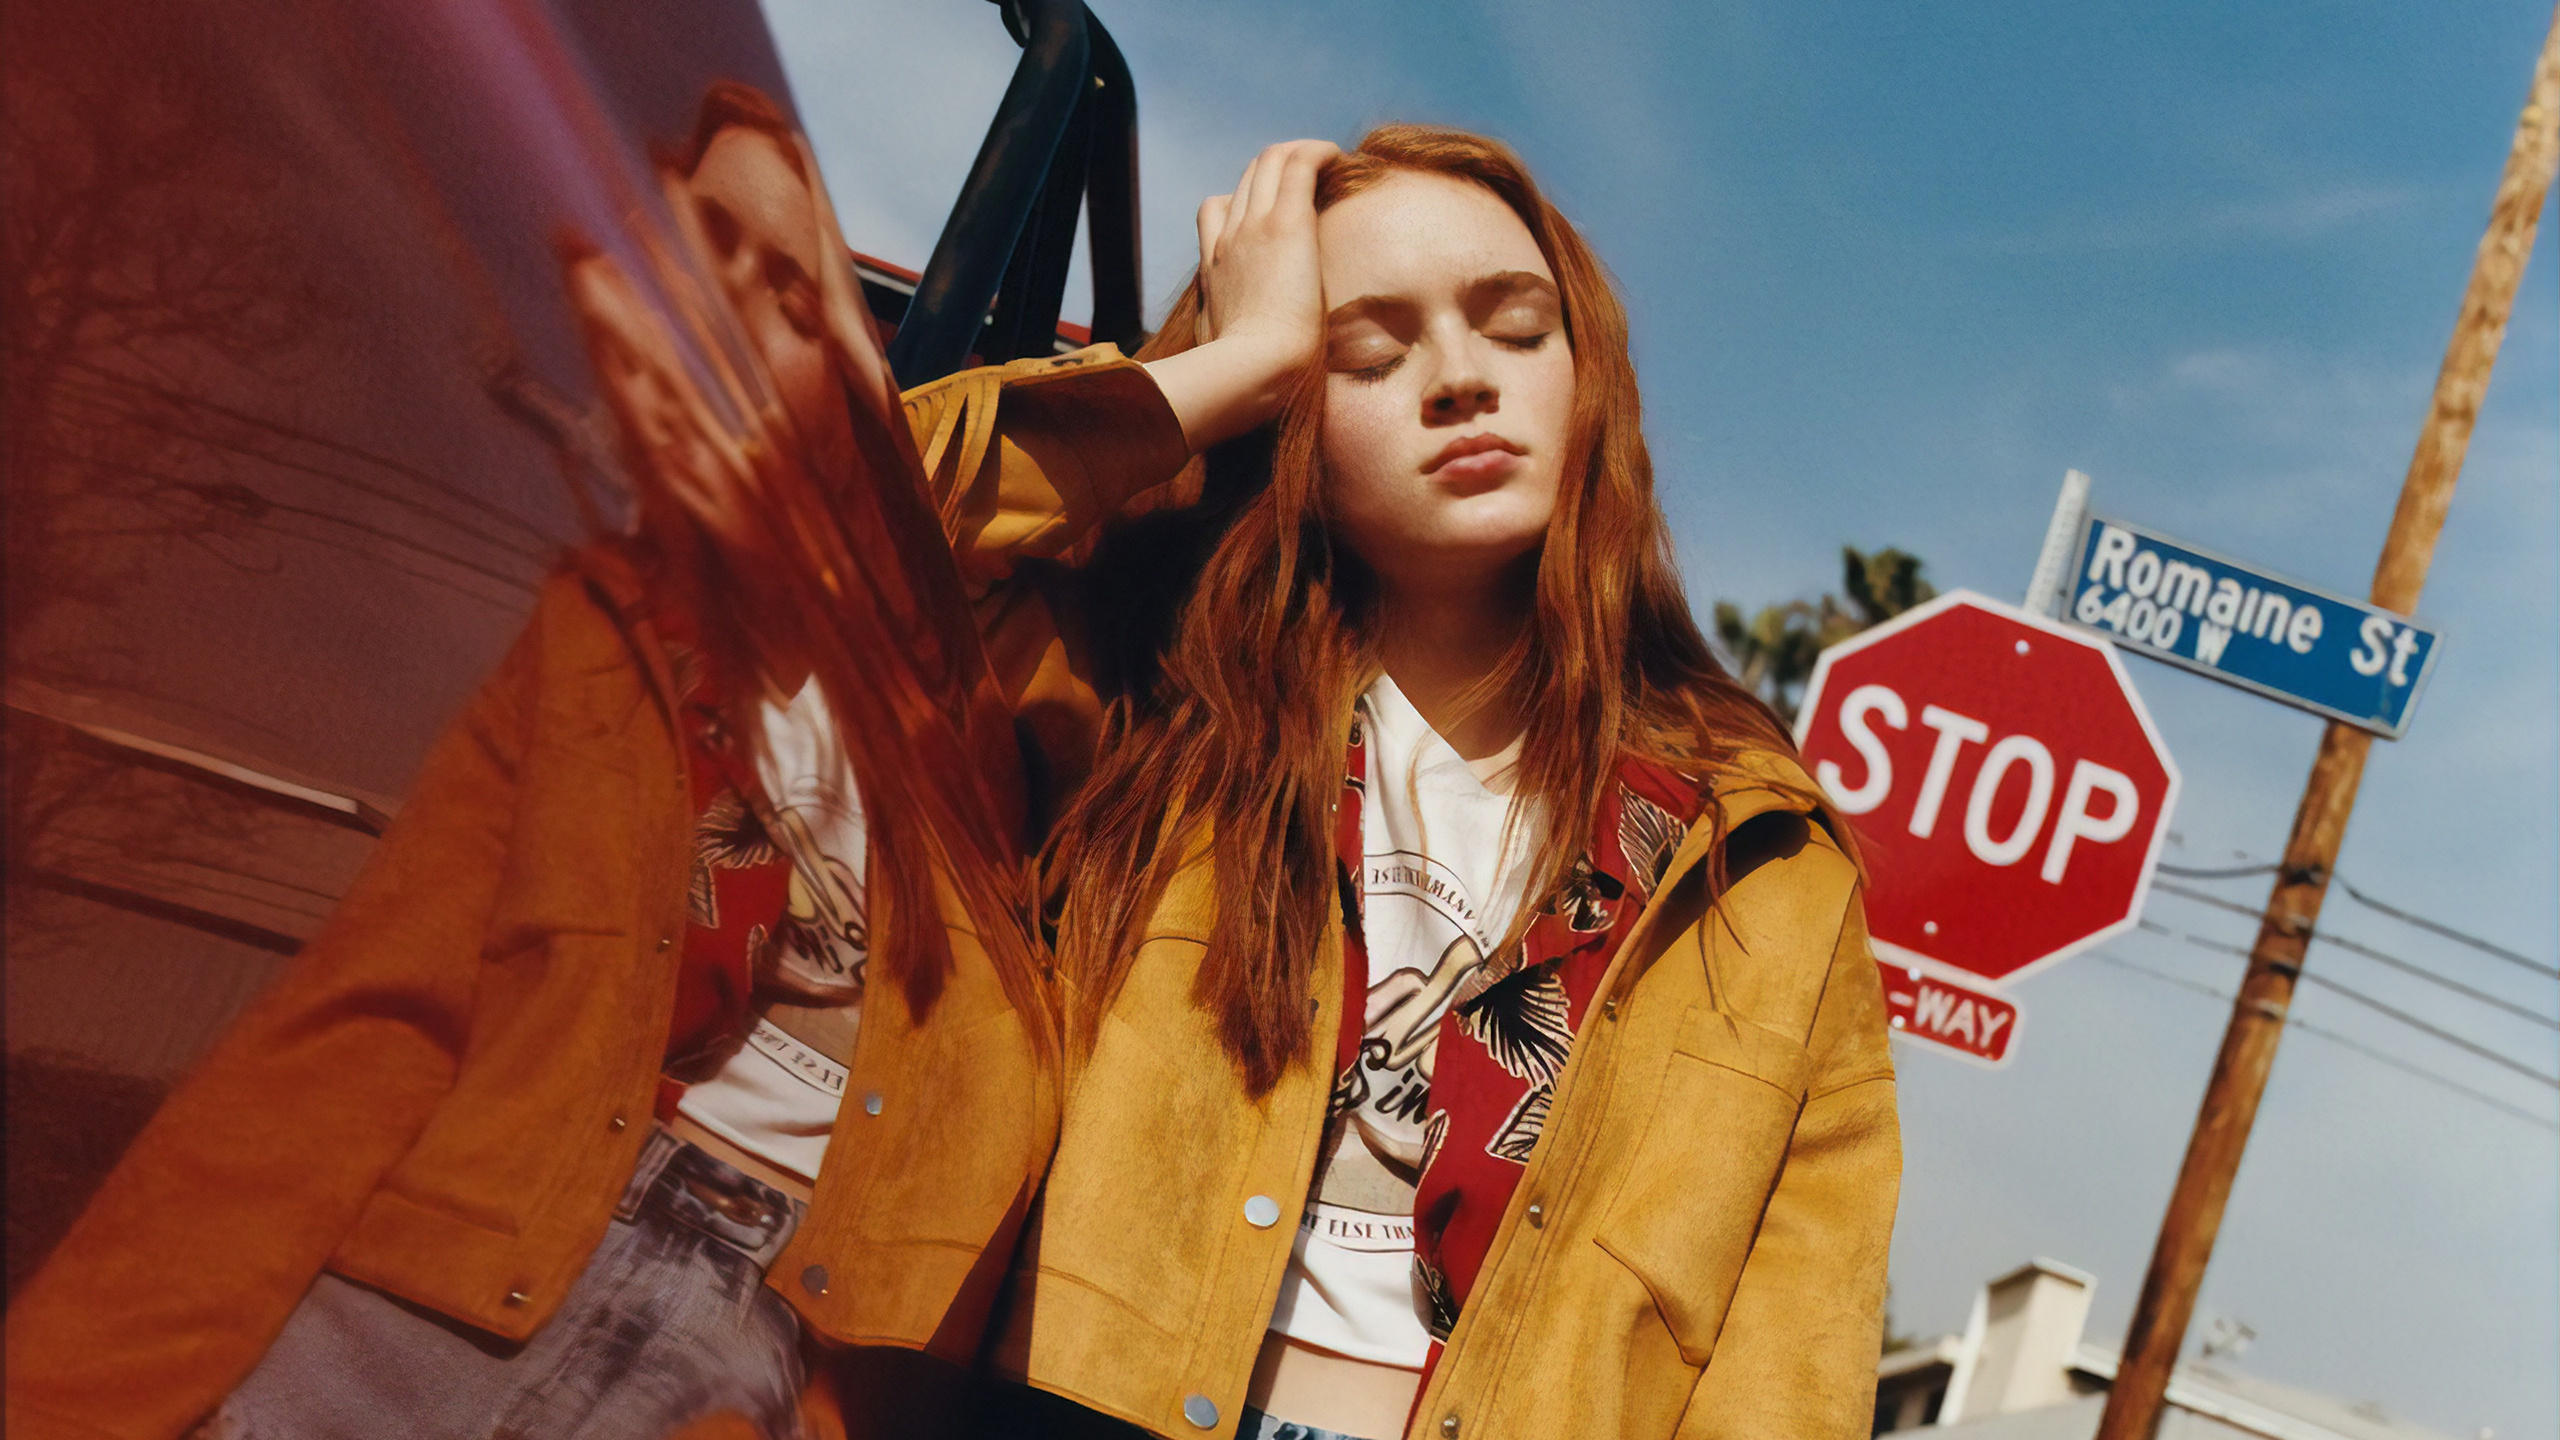 Sadie Sink TV shows, Pull & Bear campaign, HD wallpapers, Fashion photography, 2560x1440 HD Desktop